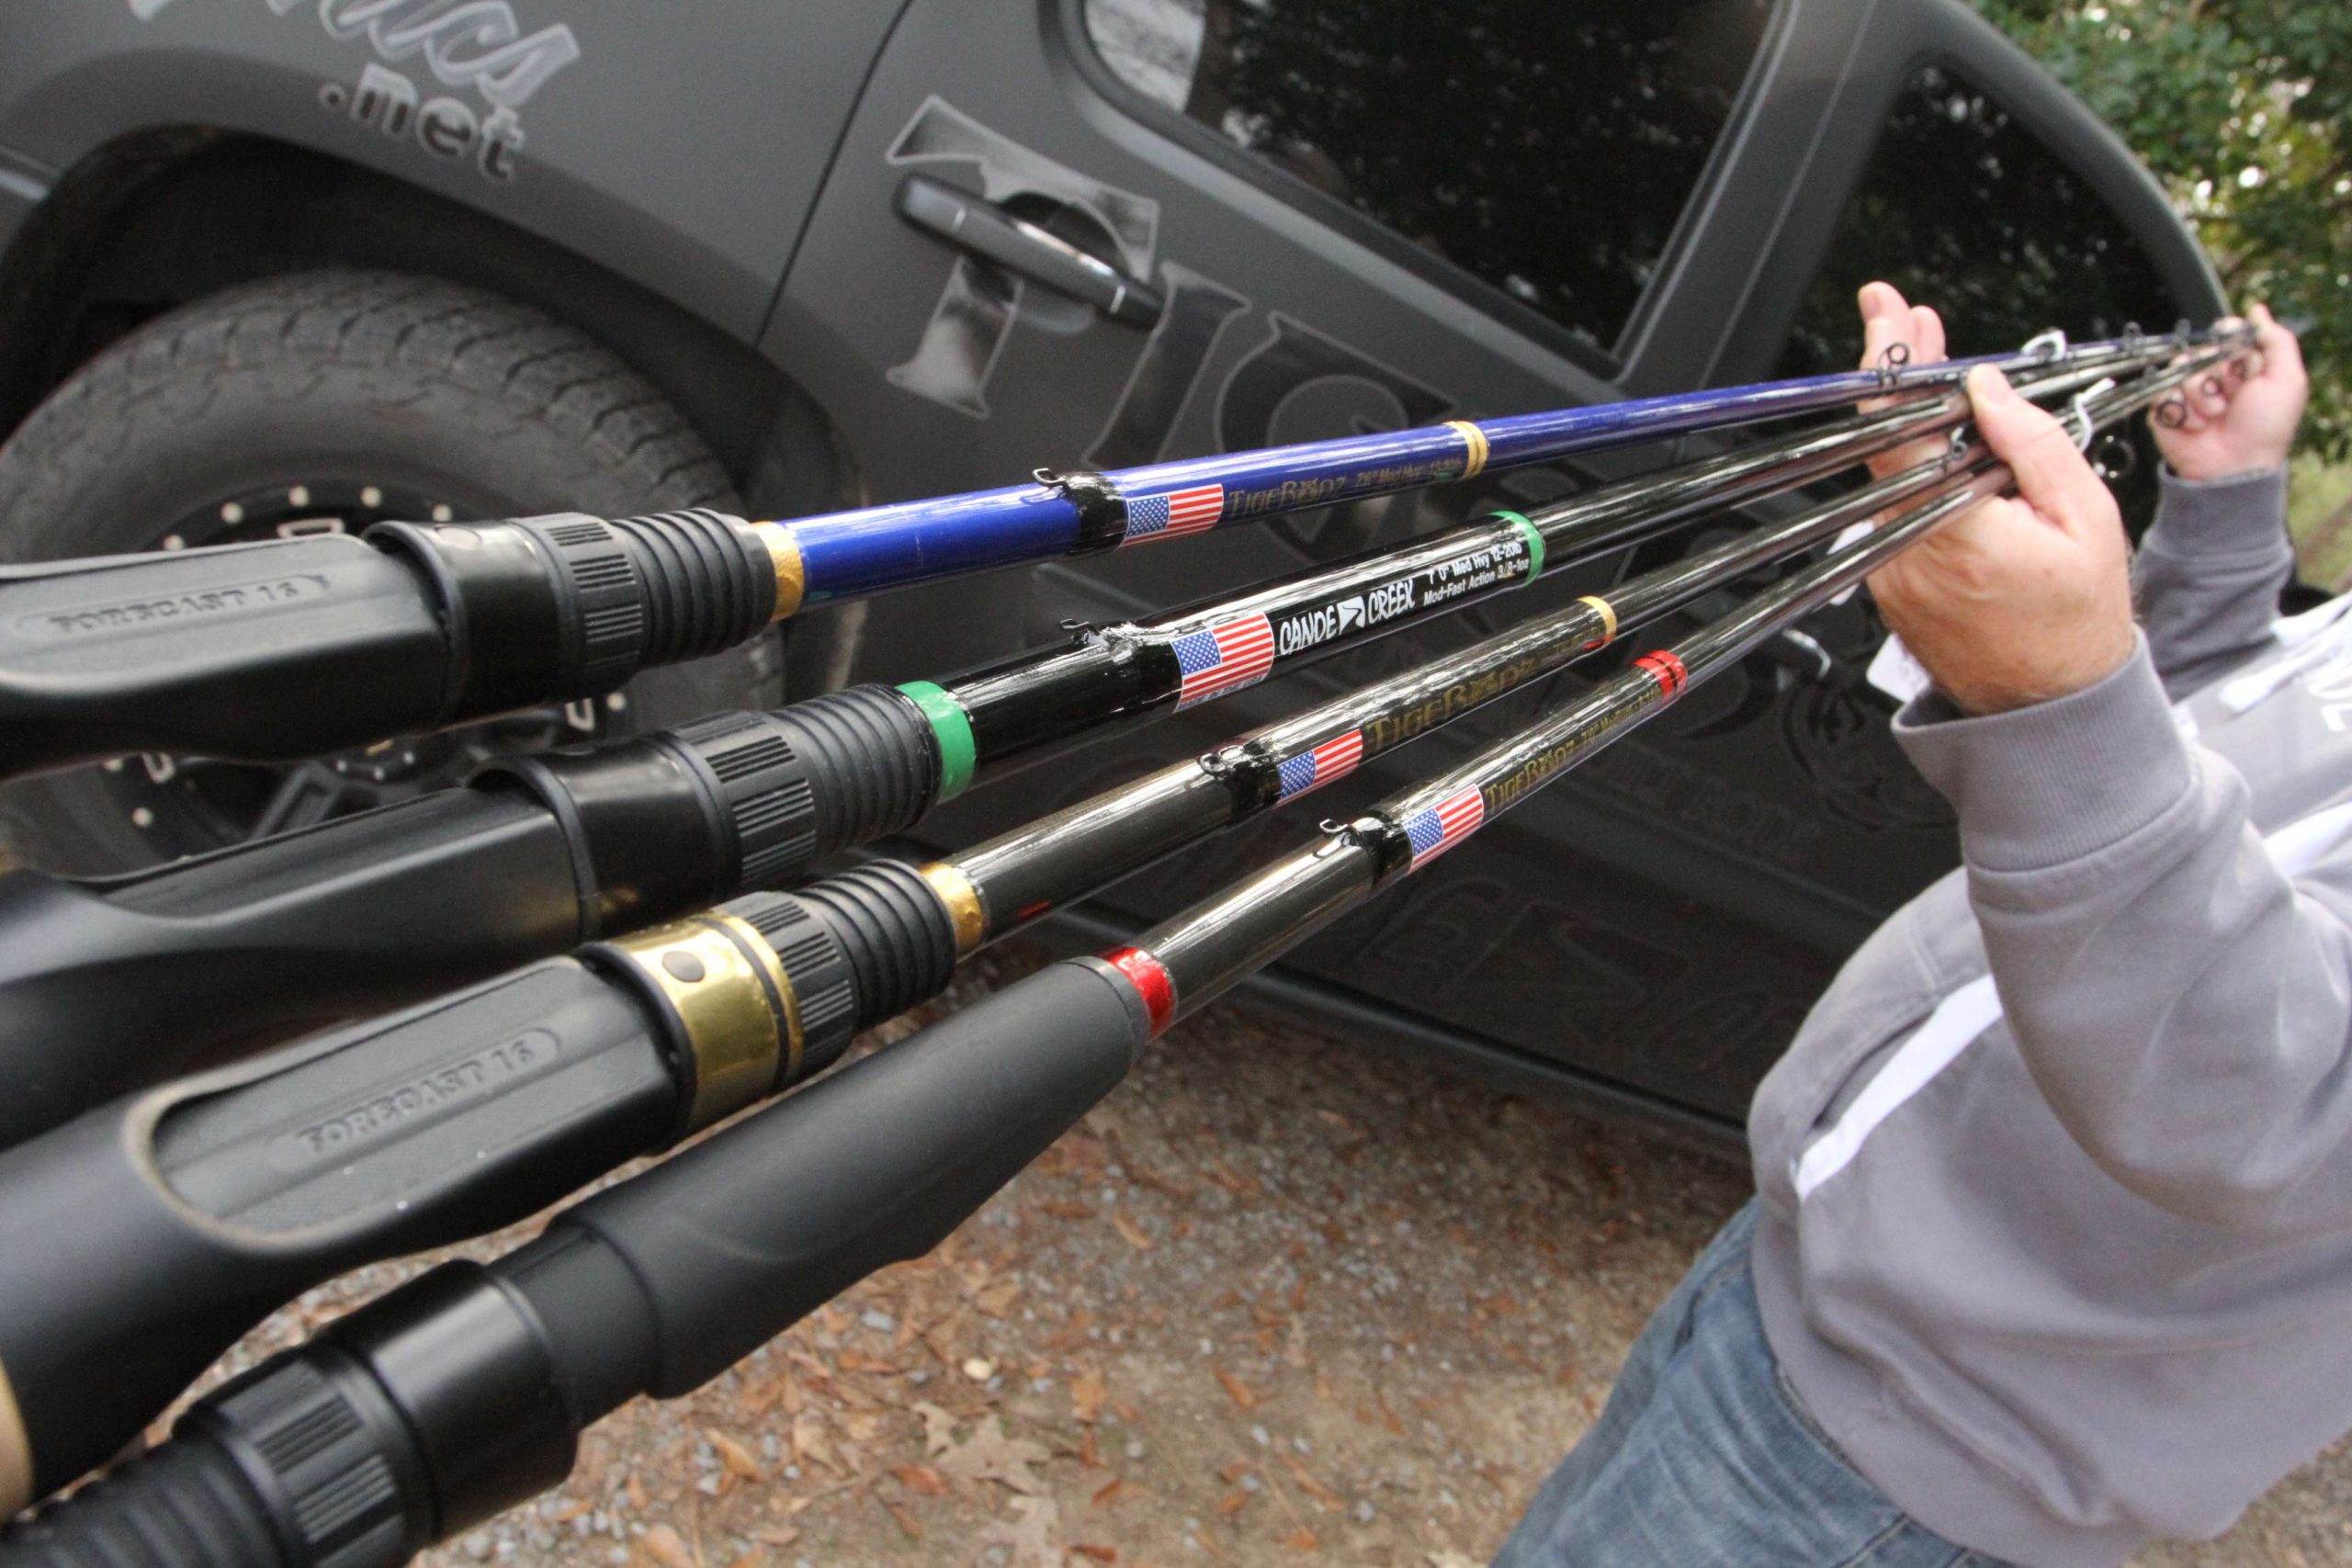 There are many technique-specific rods available in the TigeRodz line, each hand crafted by a guy who loves to catch big bass on hand-made rods. 